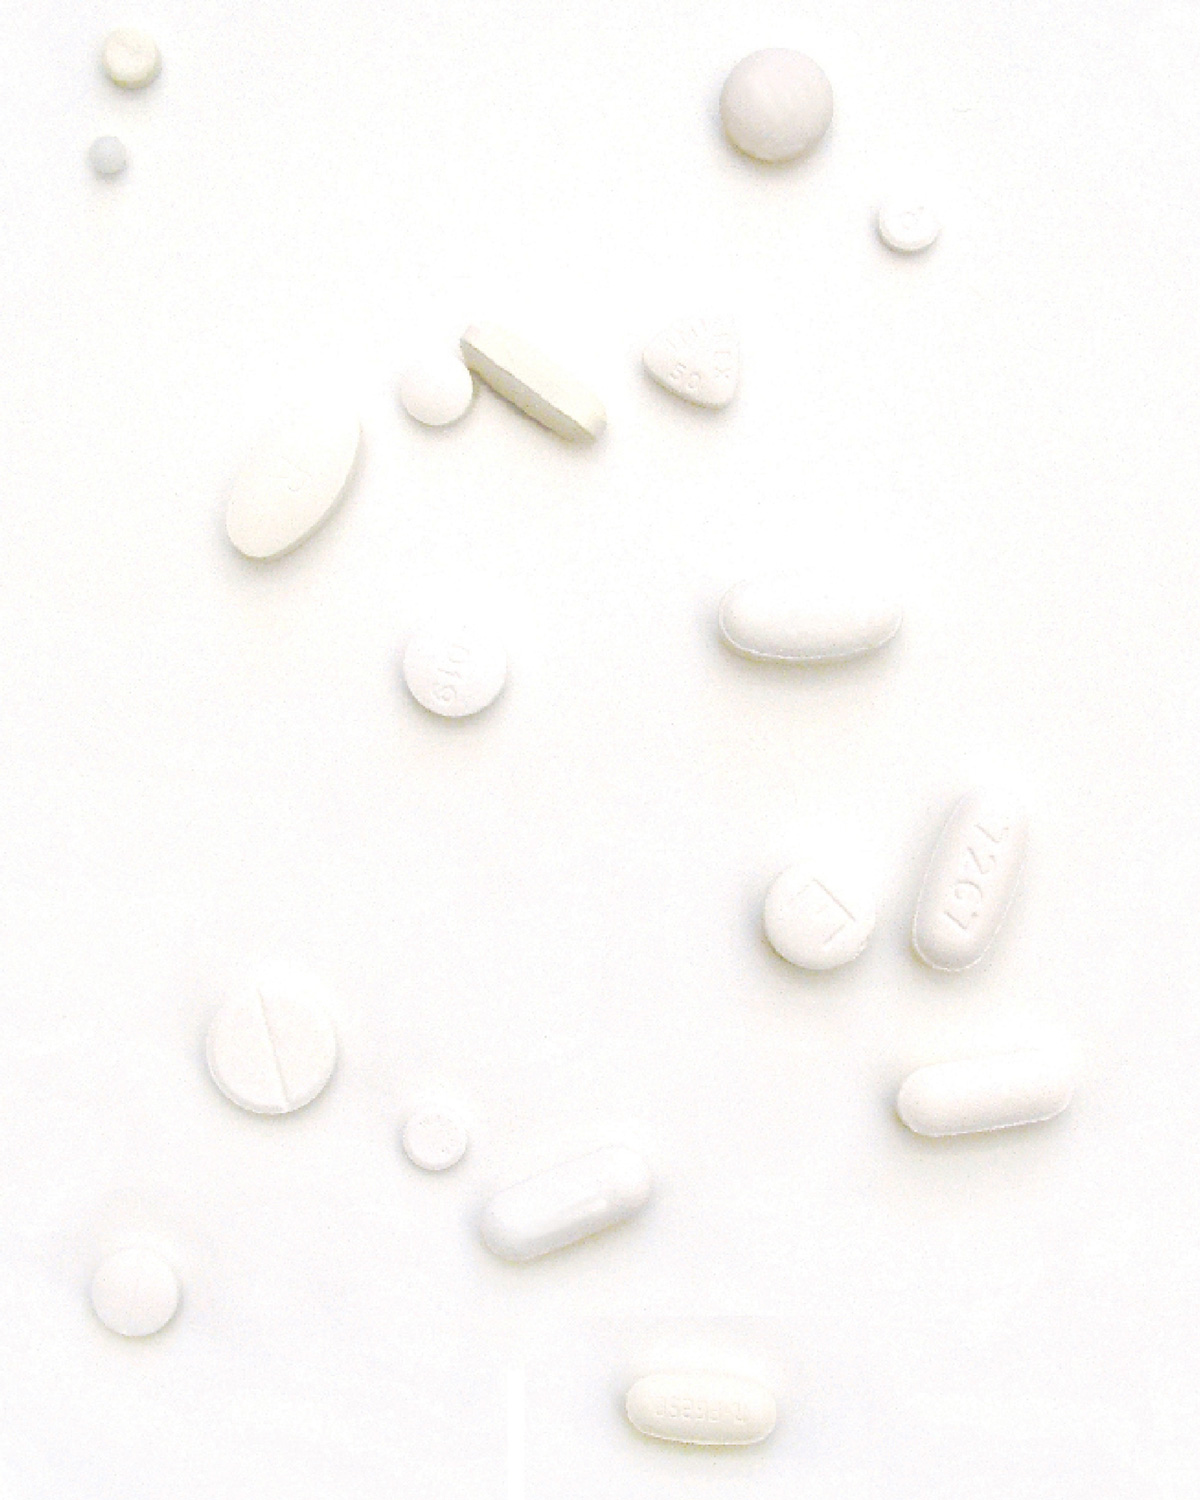 A photograph of a number of different white pills on a white background.